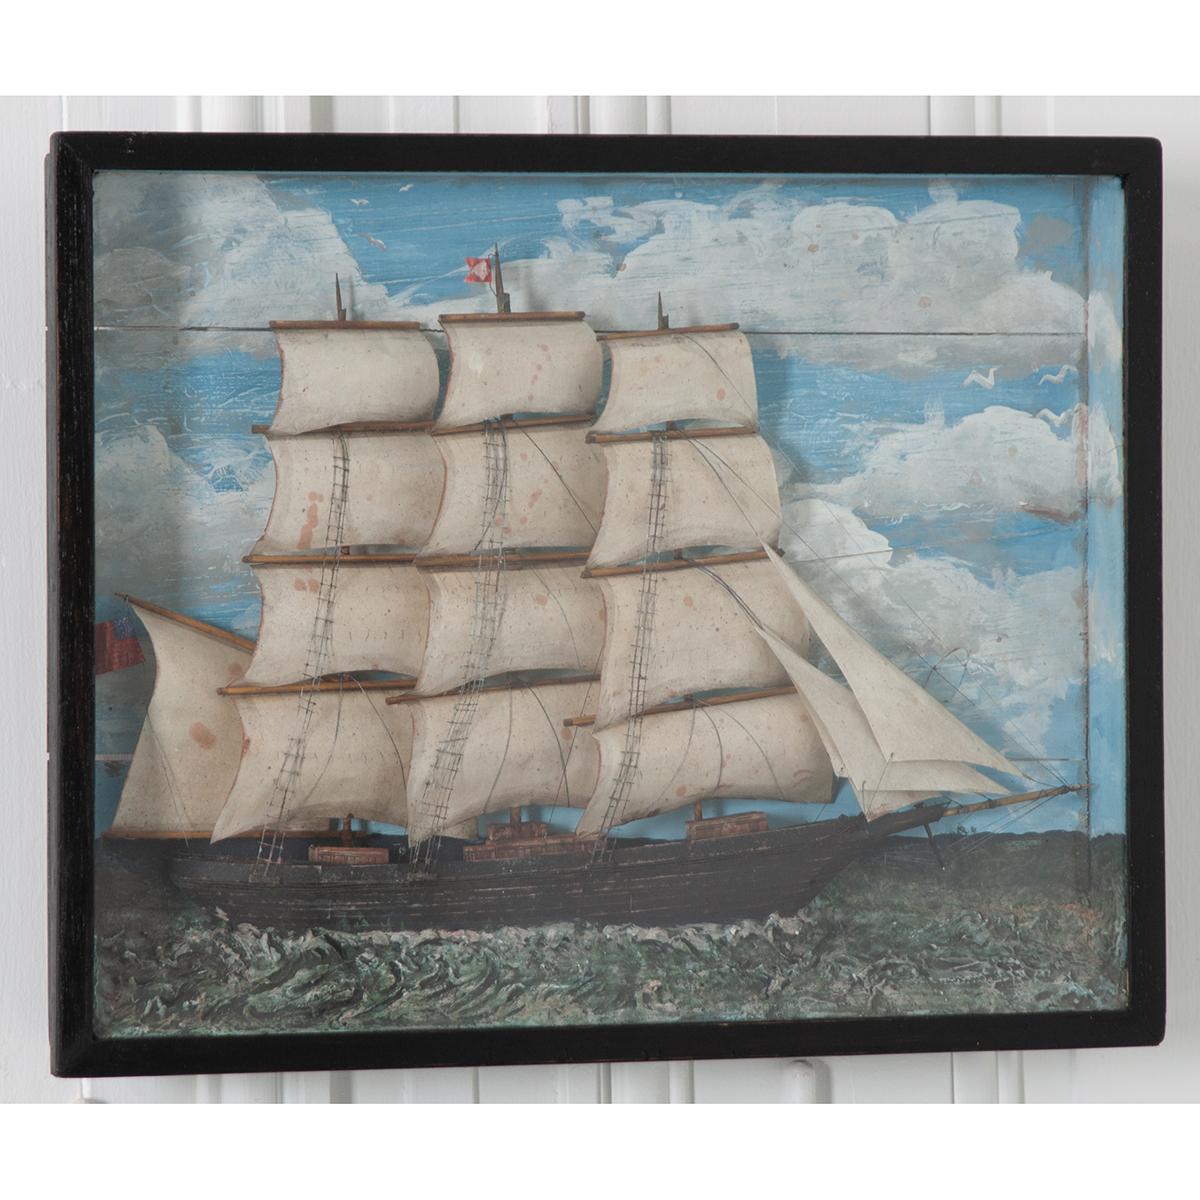 A brilliant English 19th century nautically themed diorama featuring a schooner. These three dimensional works of art were typically made by sailors in the 19th century. This diorama depicts a schooner at sea, but near the coast. Note the